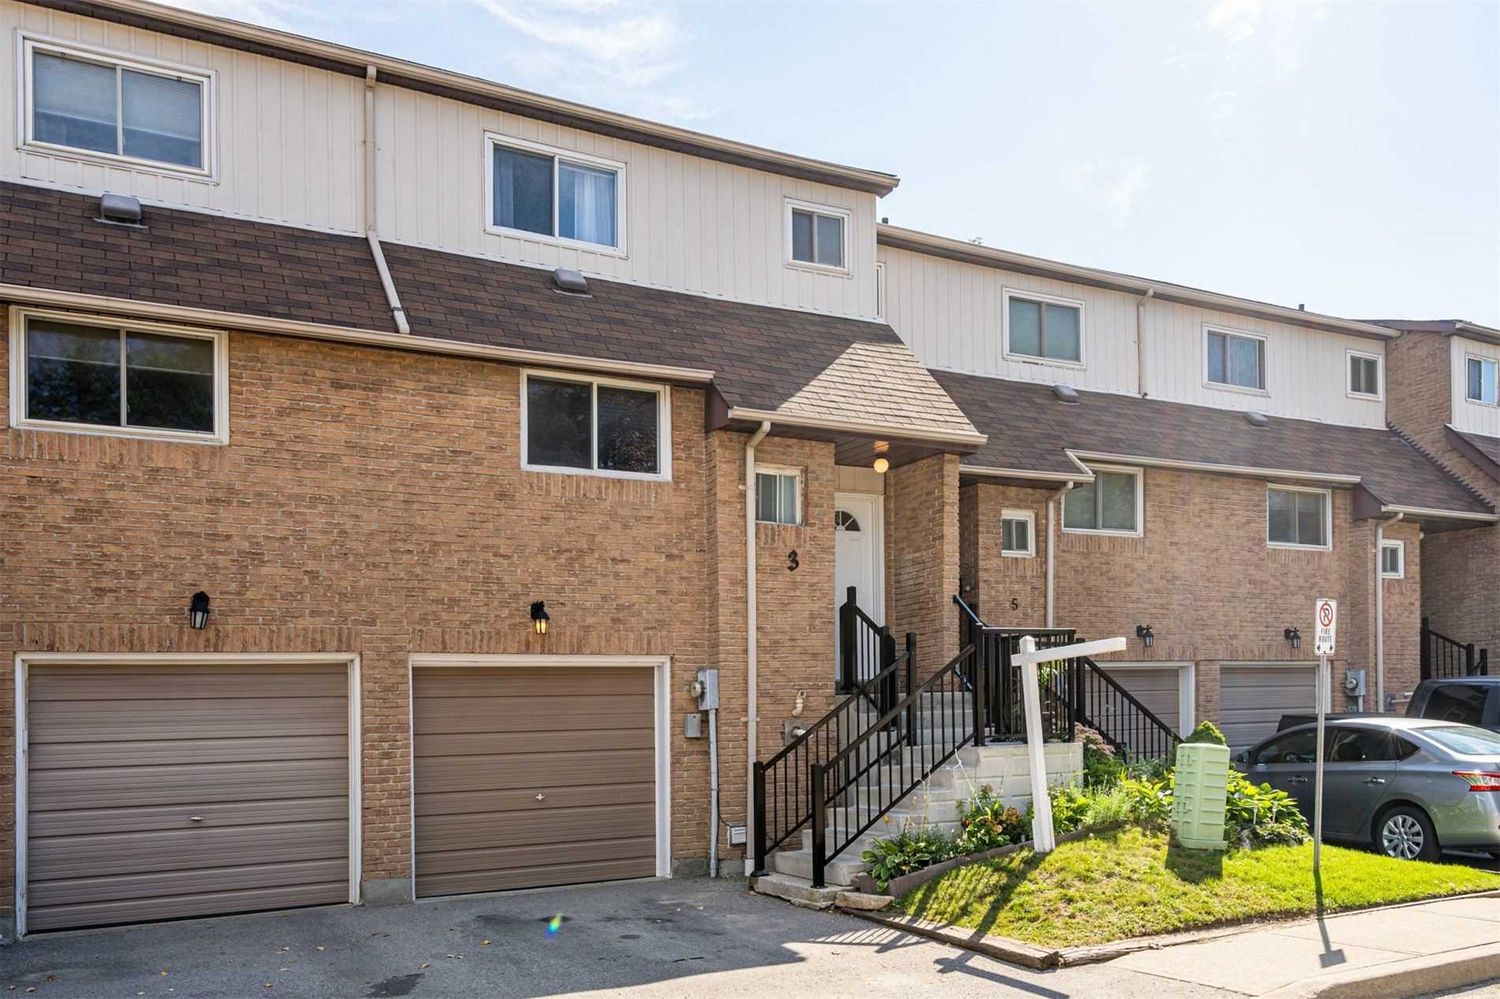 4-48 Randall Drive. Randall Drive Townhomes is located in  Ajax, Toronto - image #2 of 2